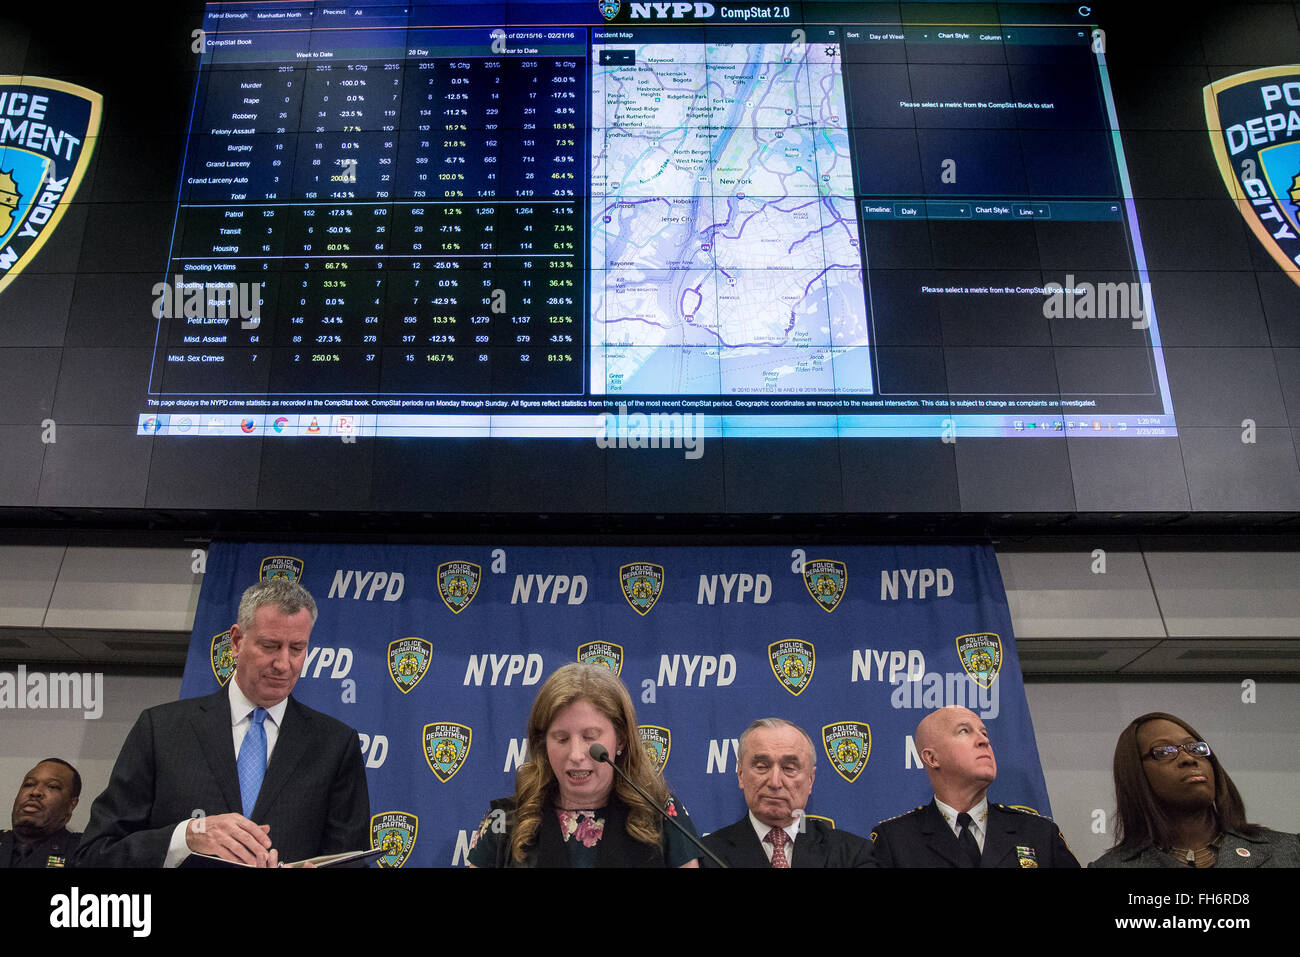 NYPD Deputy Commissioner of Information Technology Jessica Tisch (bottom center) explains to the press one of the cases where officers used the new department-issued technology as the monitor above her displays illustrative examples of CompStat 2.0 in use . NYC Mayor Bill de Blasio and Police Commissioner William Bratton held a press briefing at One Police Plaza, the headquarters of the NYPD, to announce the launch of 'CompStat 2.0,' a new system for both publicly sharing crime data and enabling much accelerated distribution of vital police information resources among officers in the field. (P Stock Photo